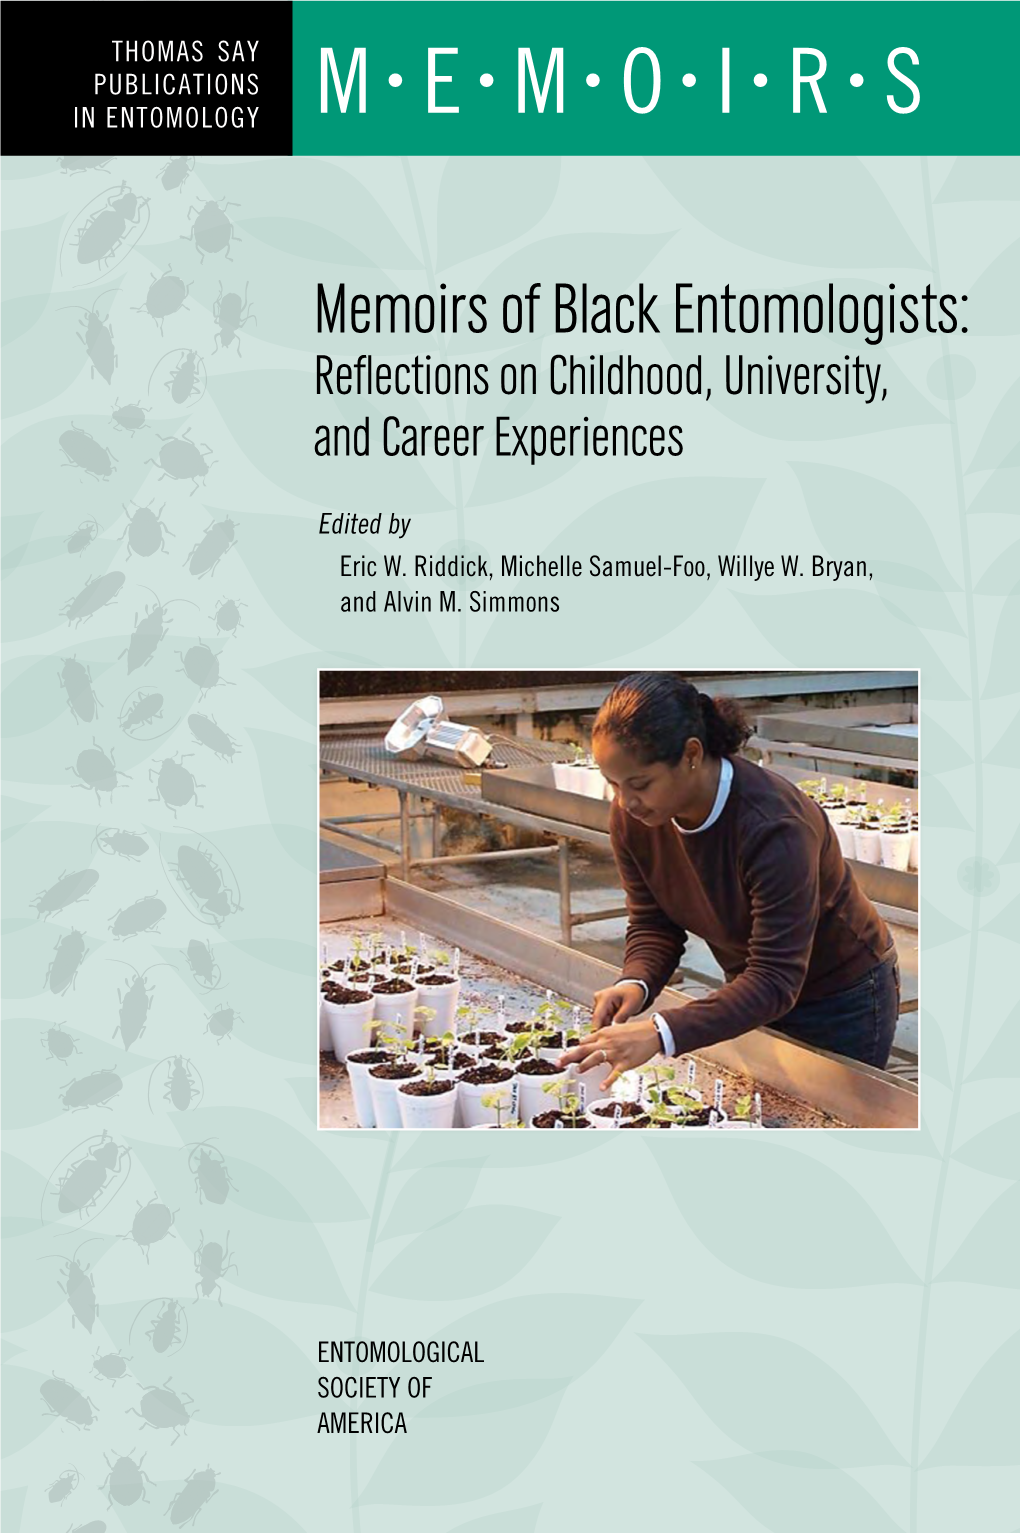 Memoirs of Black Entomologists: Reflections on Childhood, University, and Career Experiences